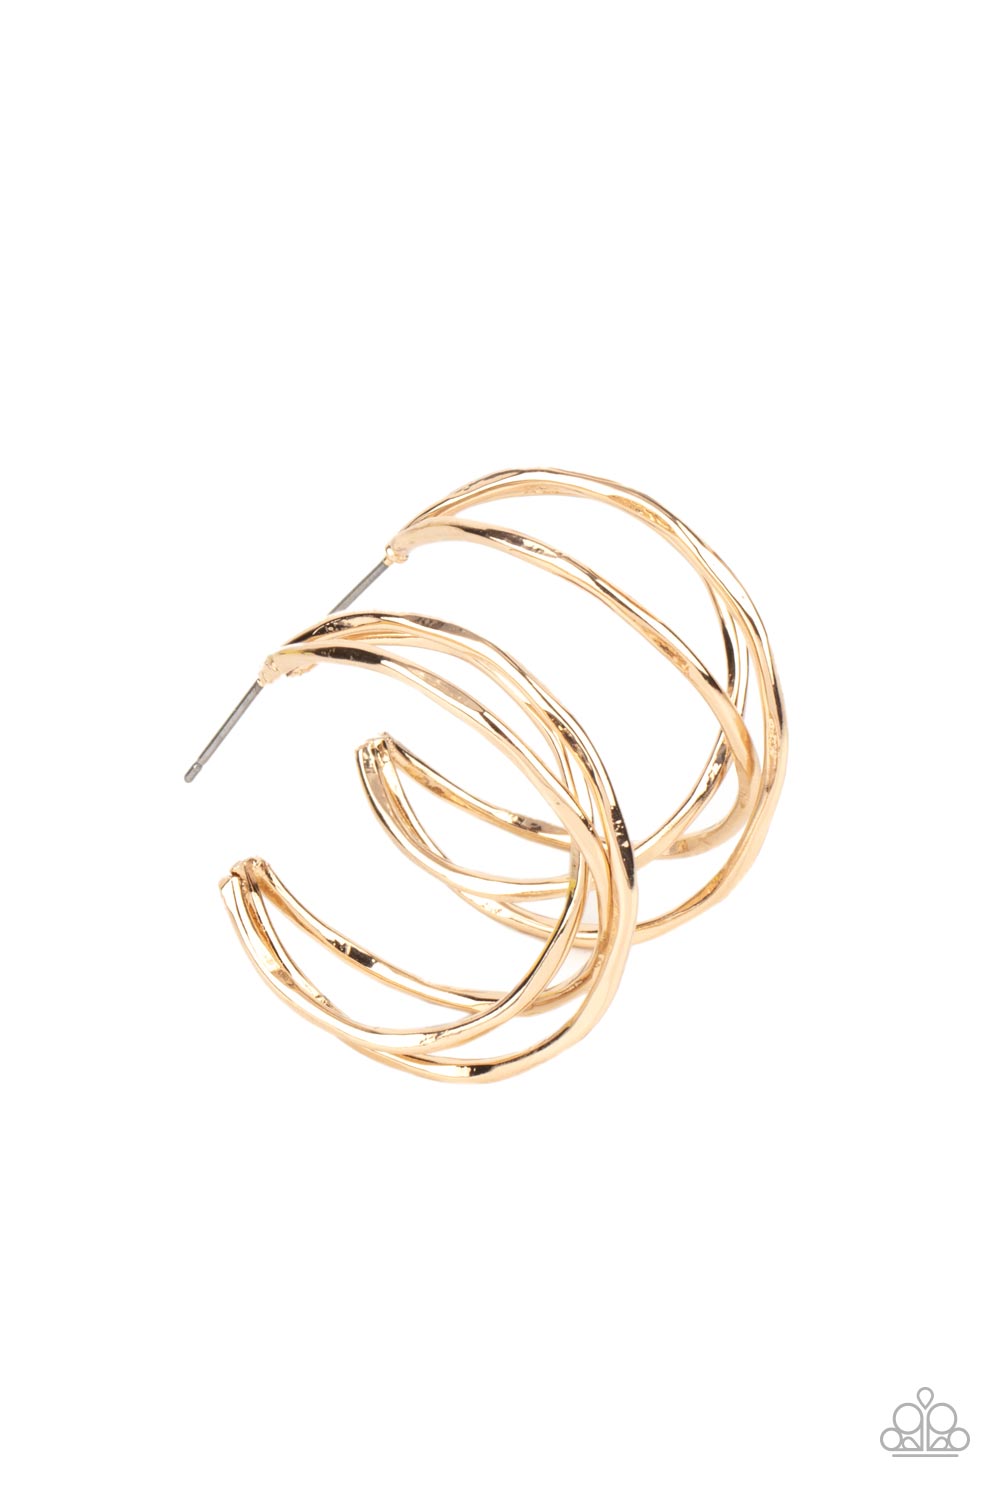 Glistening gold bars delicately overlap into a 3-dimensional frame, creating a dramatic hoop